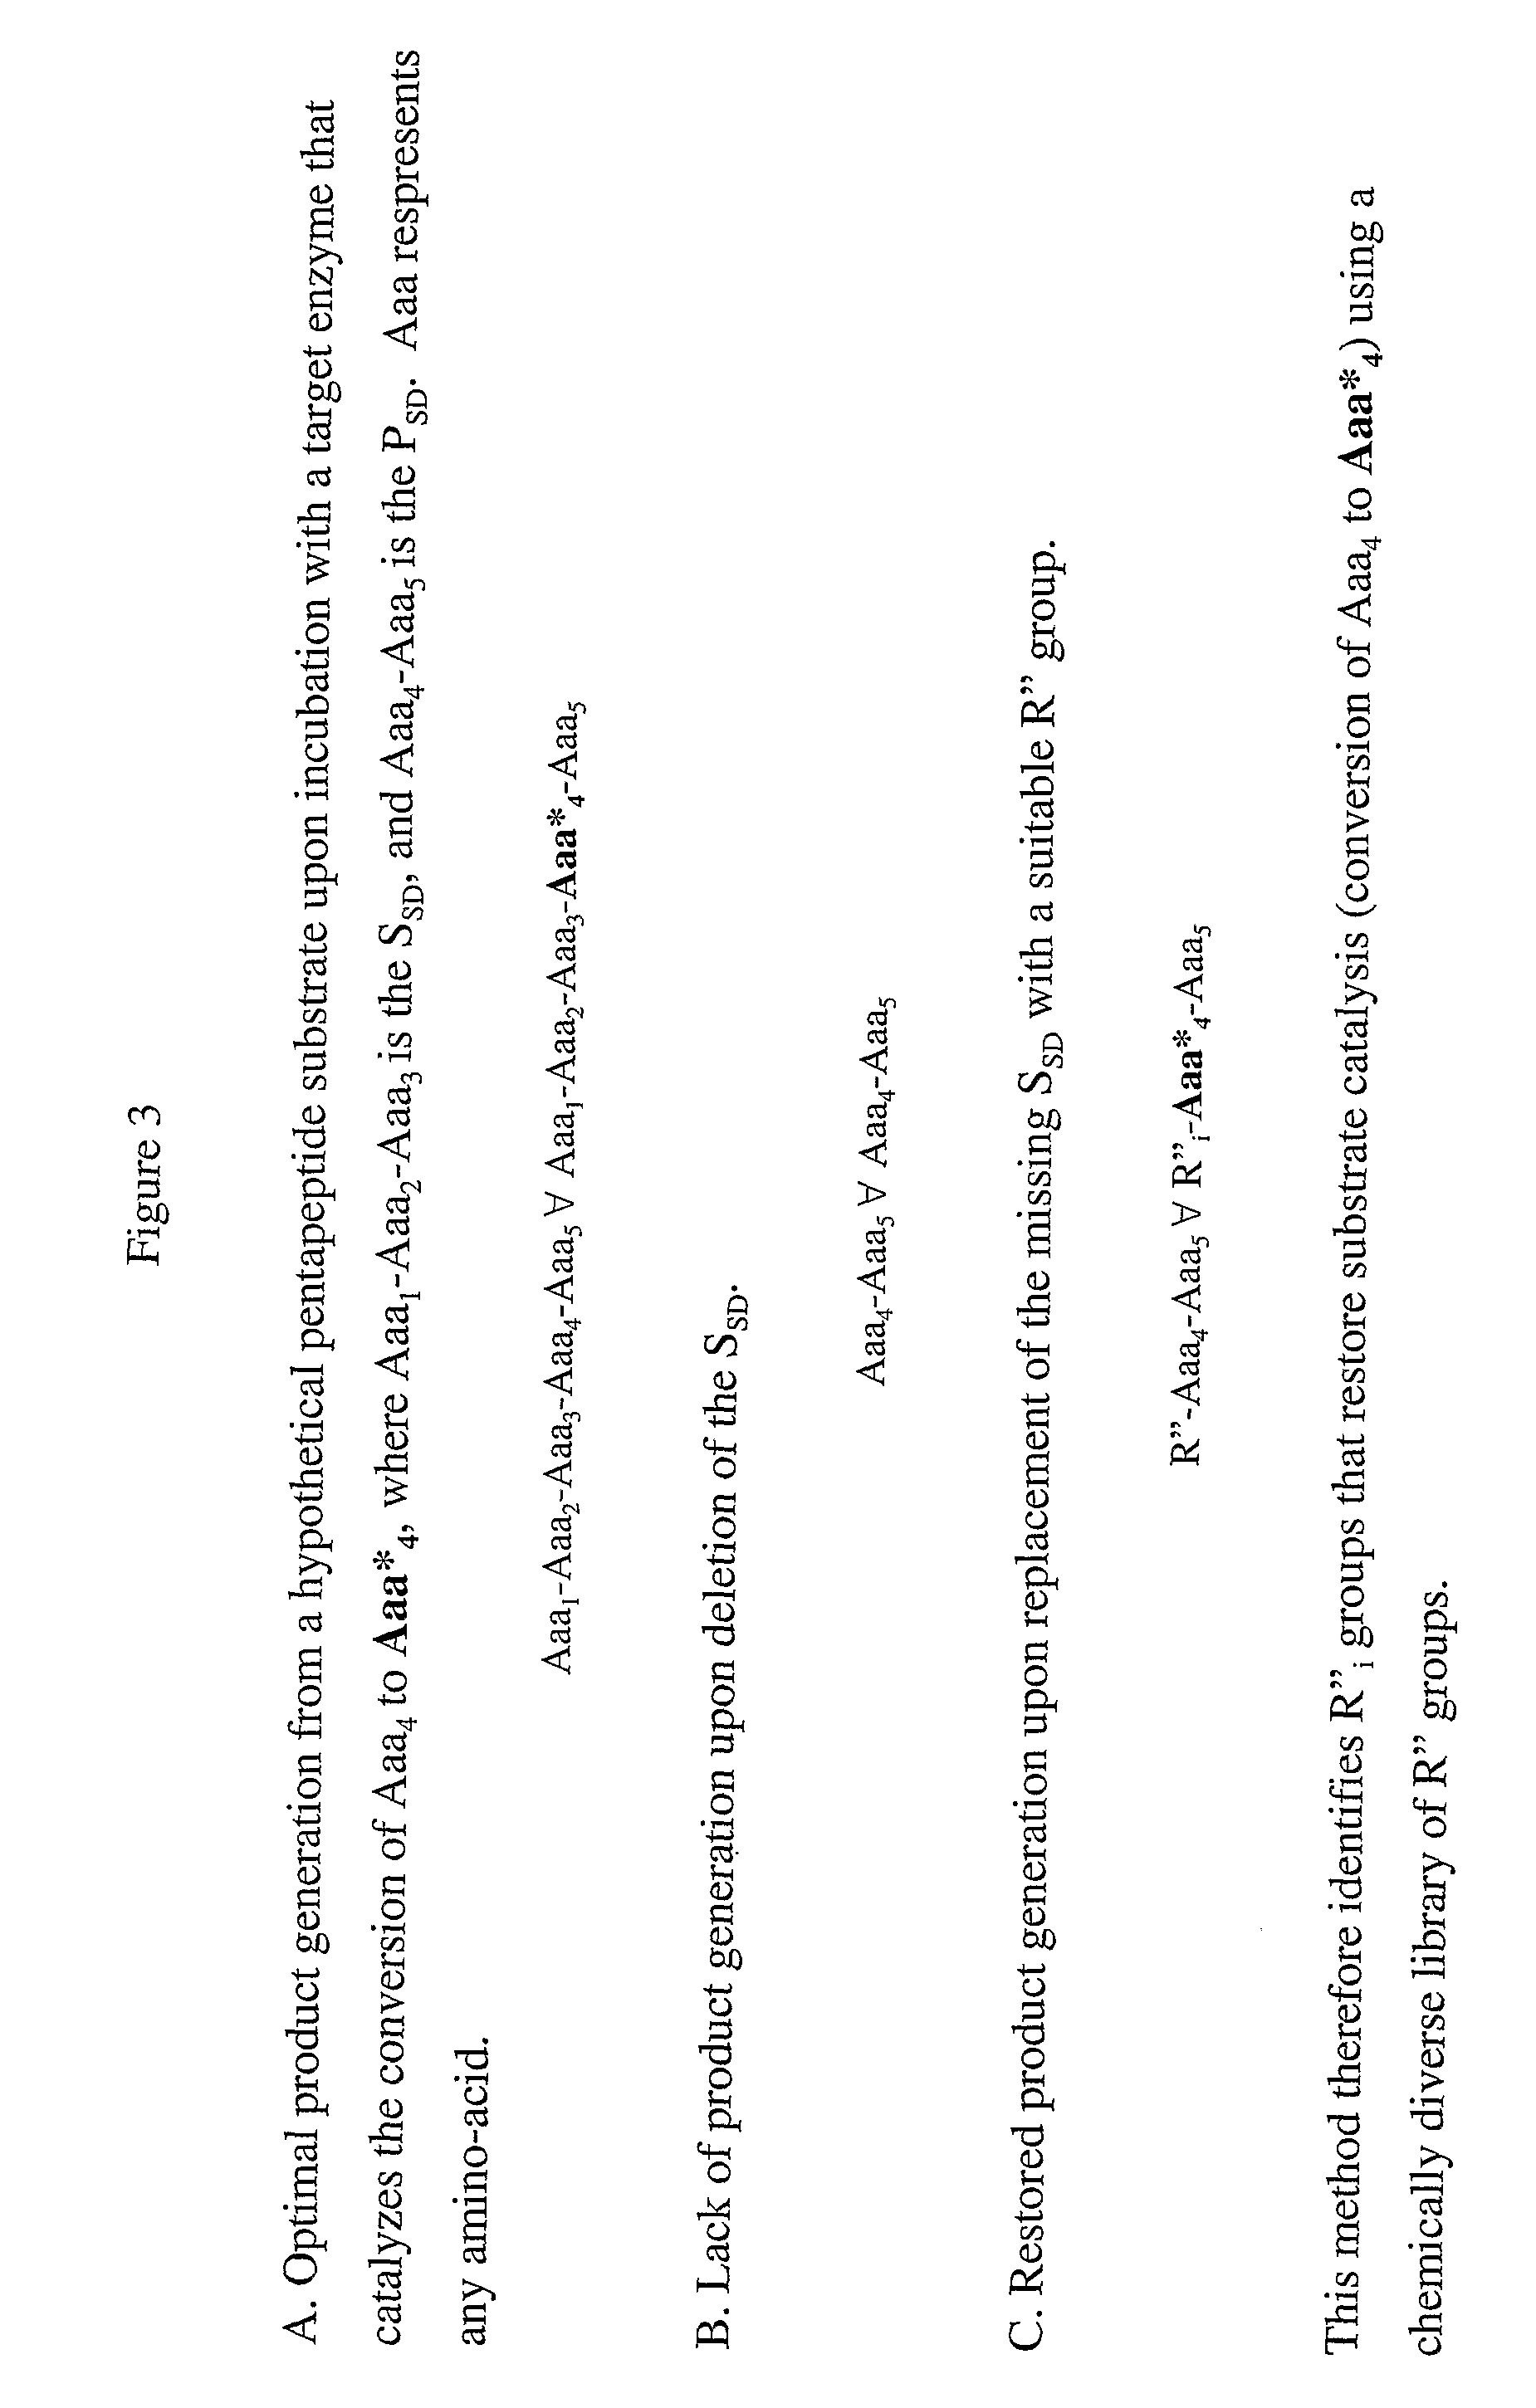 Methods for identification of inhibitors of enzyme activity